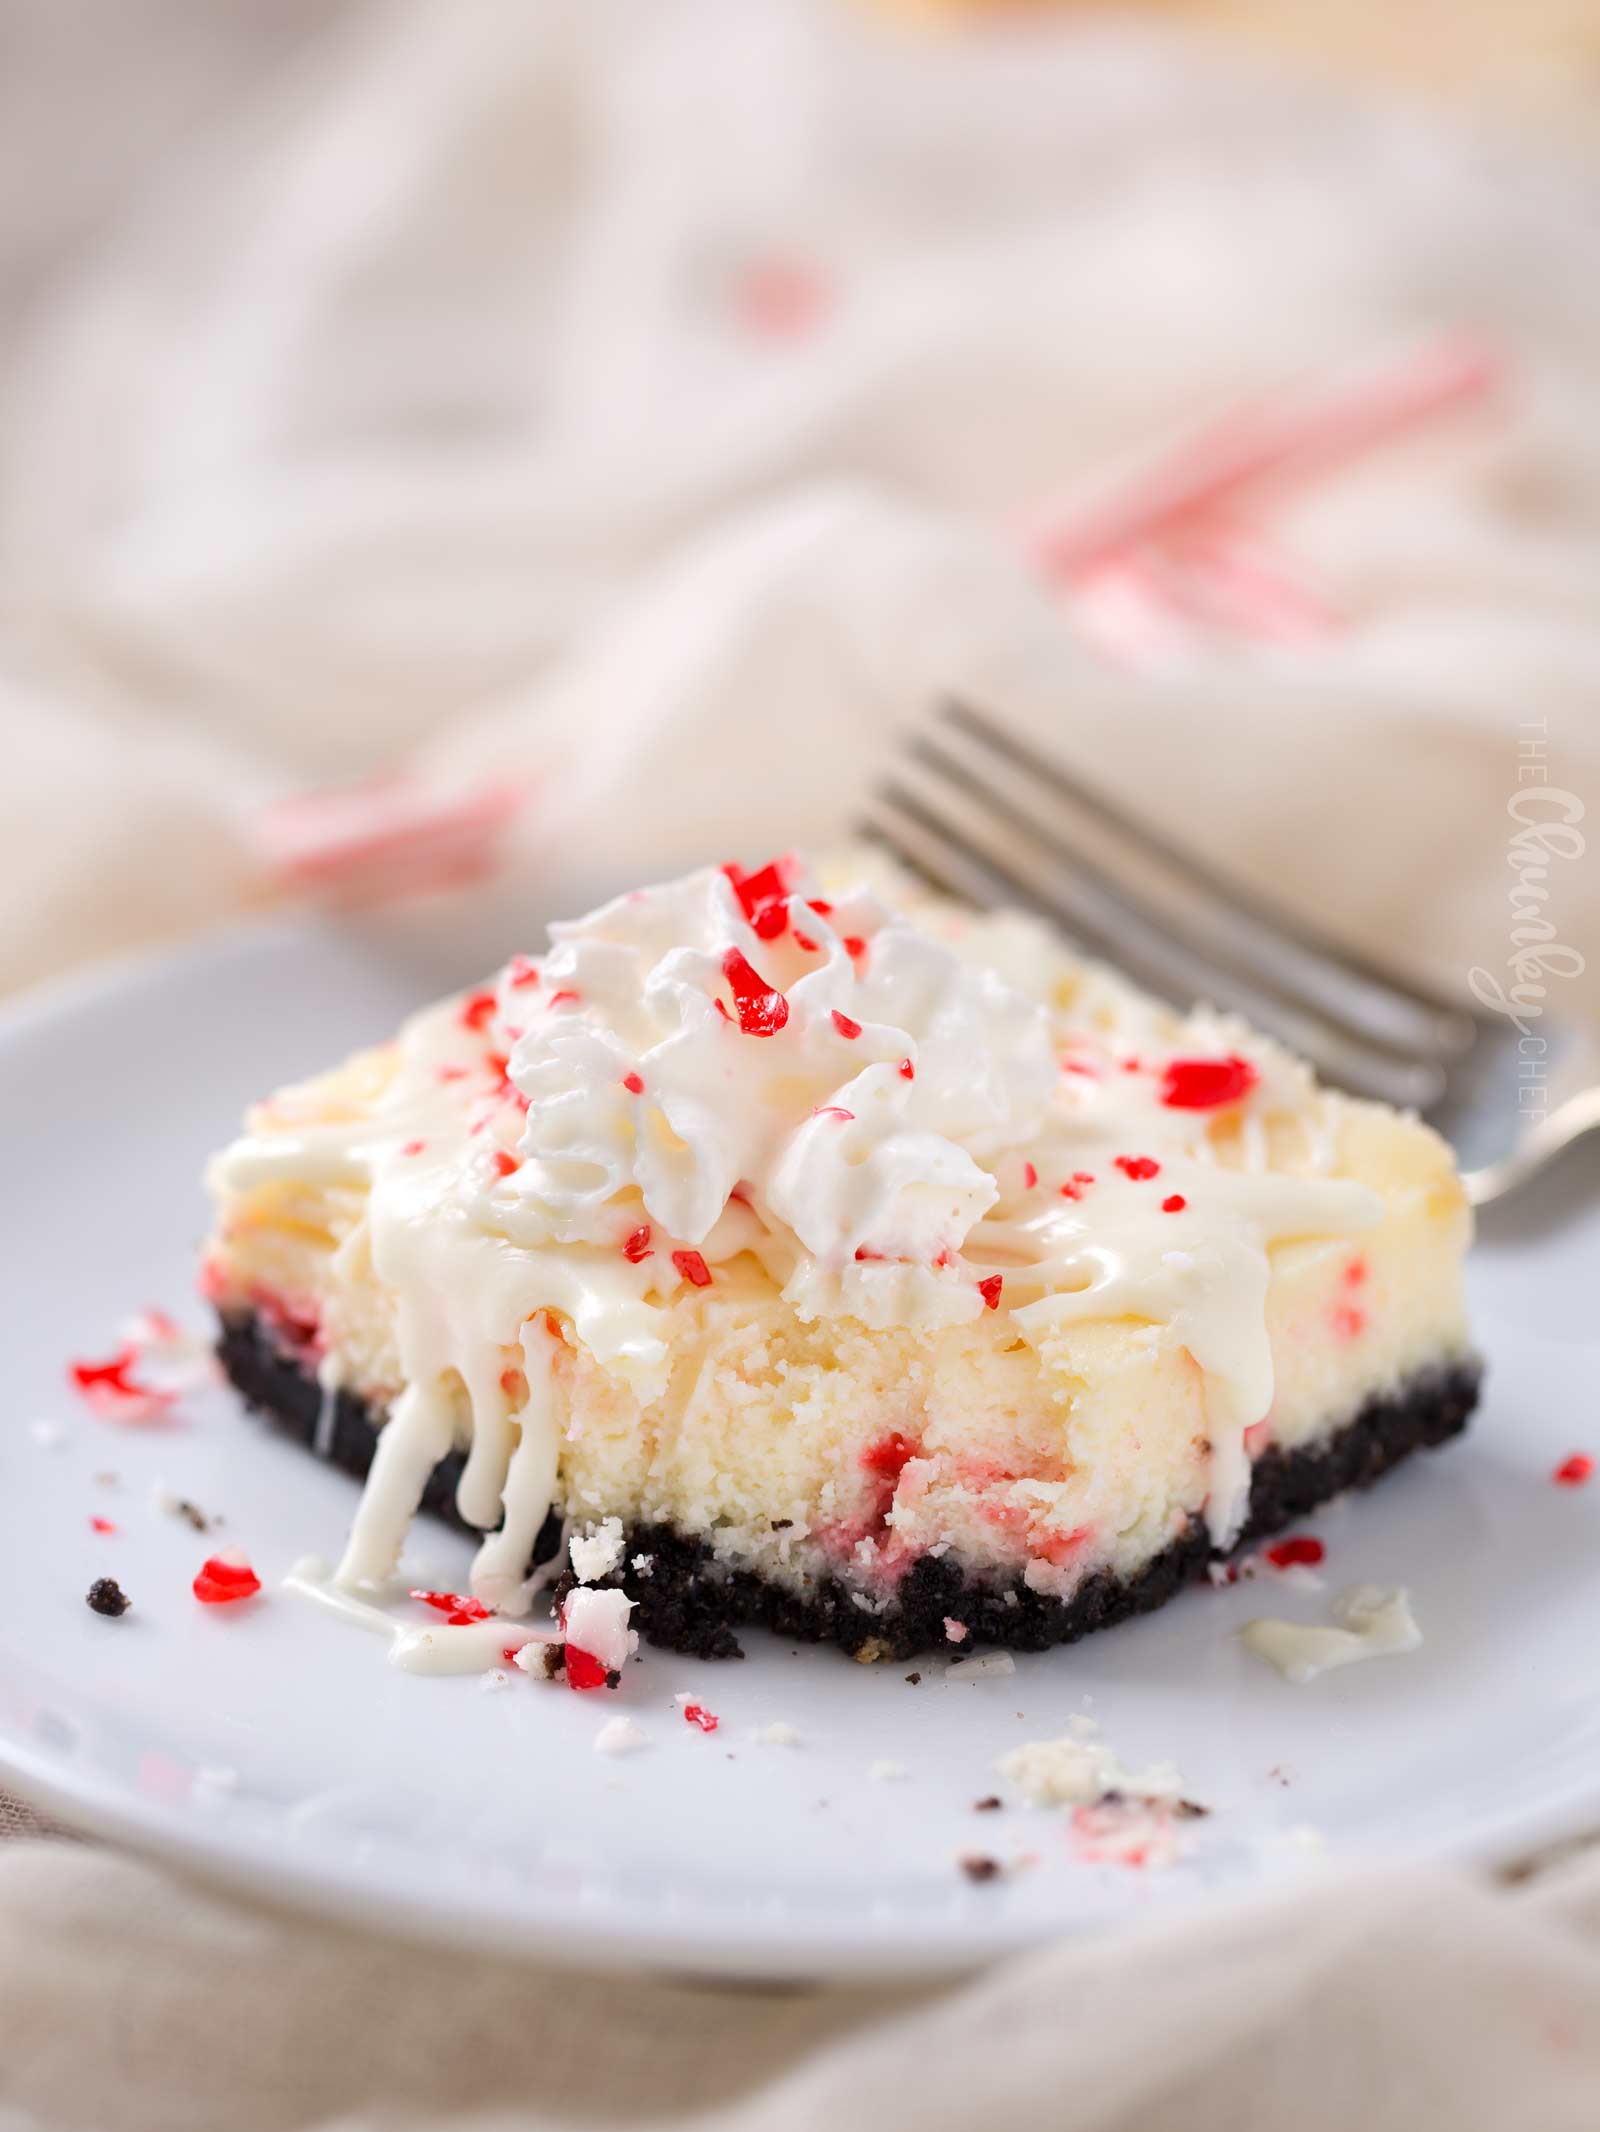 Peppermint White Chocolate Cheesecake Bars | An Oreo cookie crust, velvety smooth white chocolate peppermint cheesecake filling, candy cane pieces, and an extra drizzle of creamy white chocolate.  Holiday baking at it's finest! | The Chunky Chef | #cheesecakerecipes #cheesecakebars #peppermint #whitechocolate #holidaybaking #Christmasdesserts